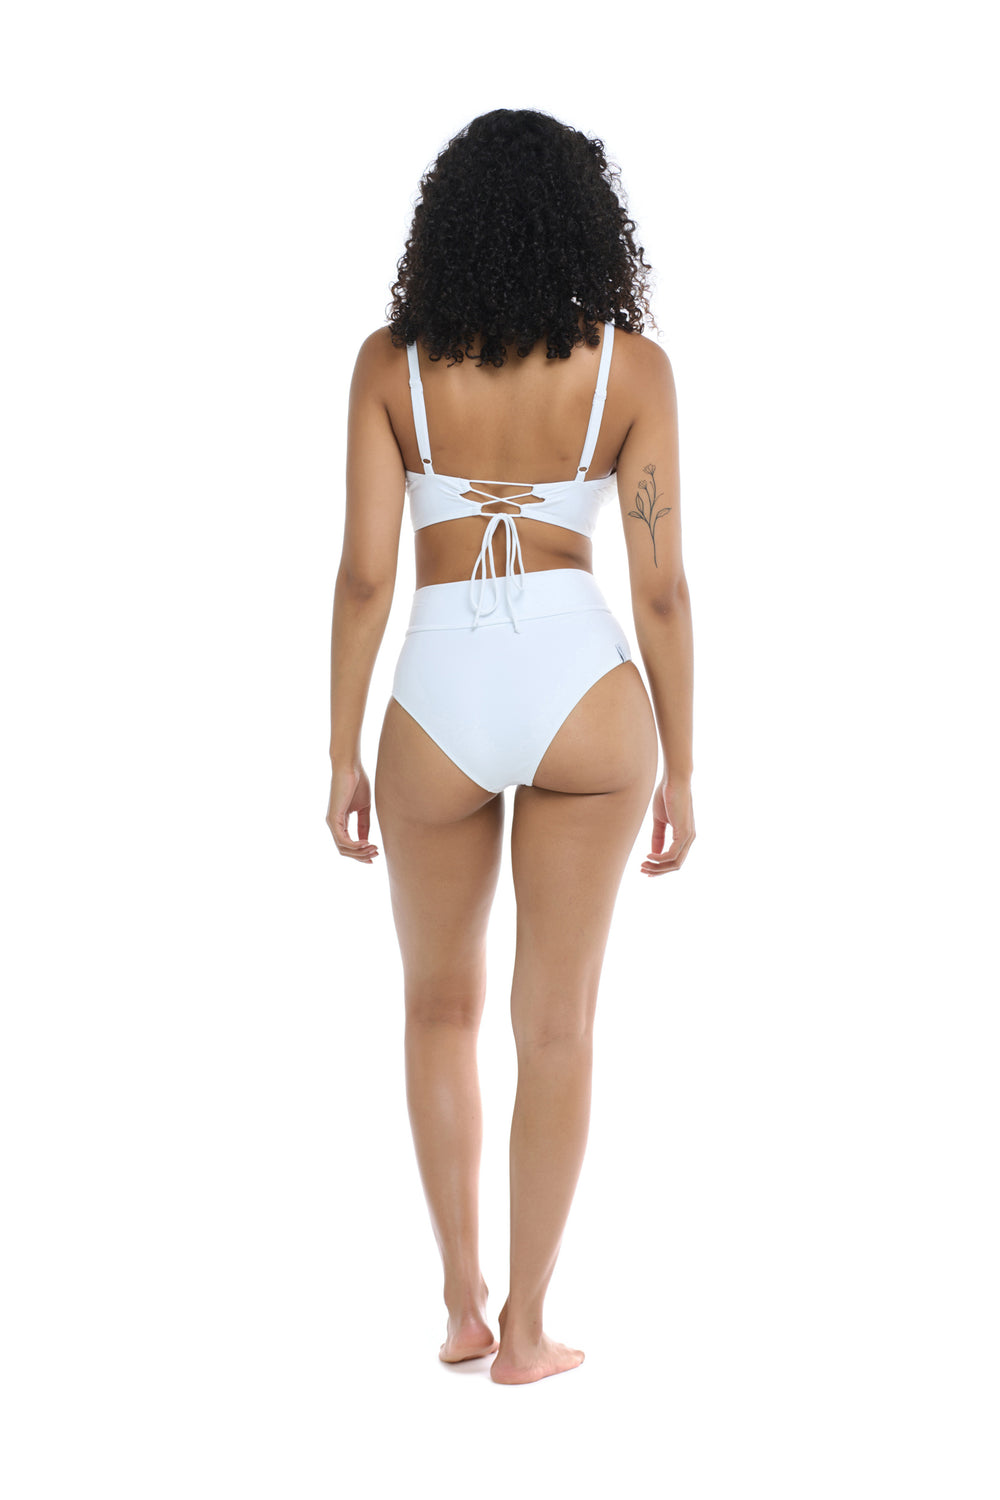  Body Glove Women's Standard Olivia D, DD, E, F Cup Bikini Top  Swimsuit with Adjustable Tie Back, Colorbox : Clothing, Shoes & Jewelry